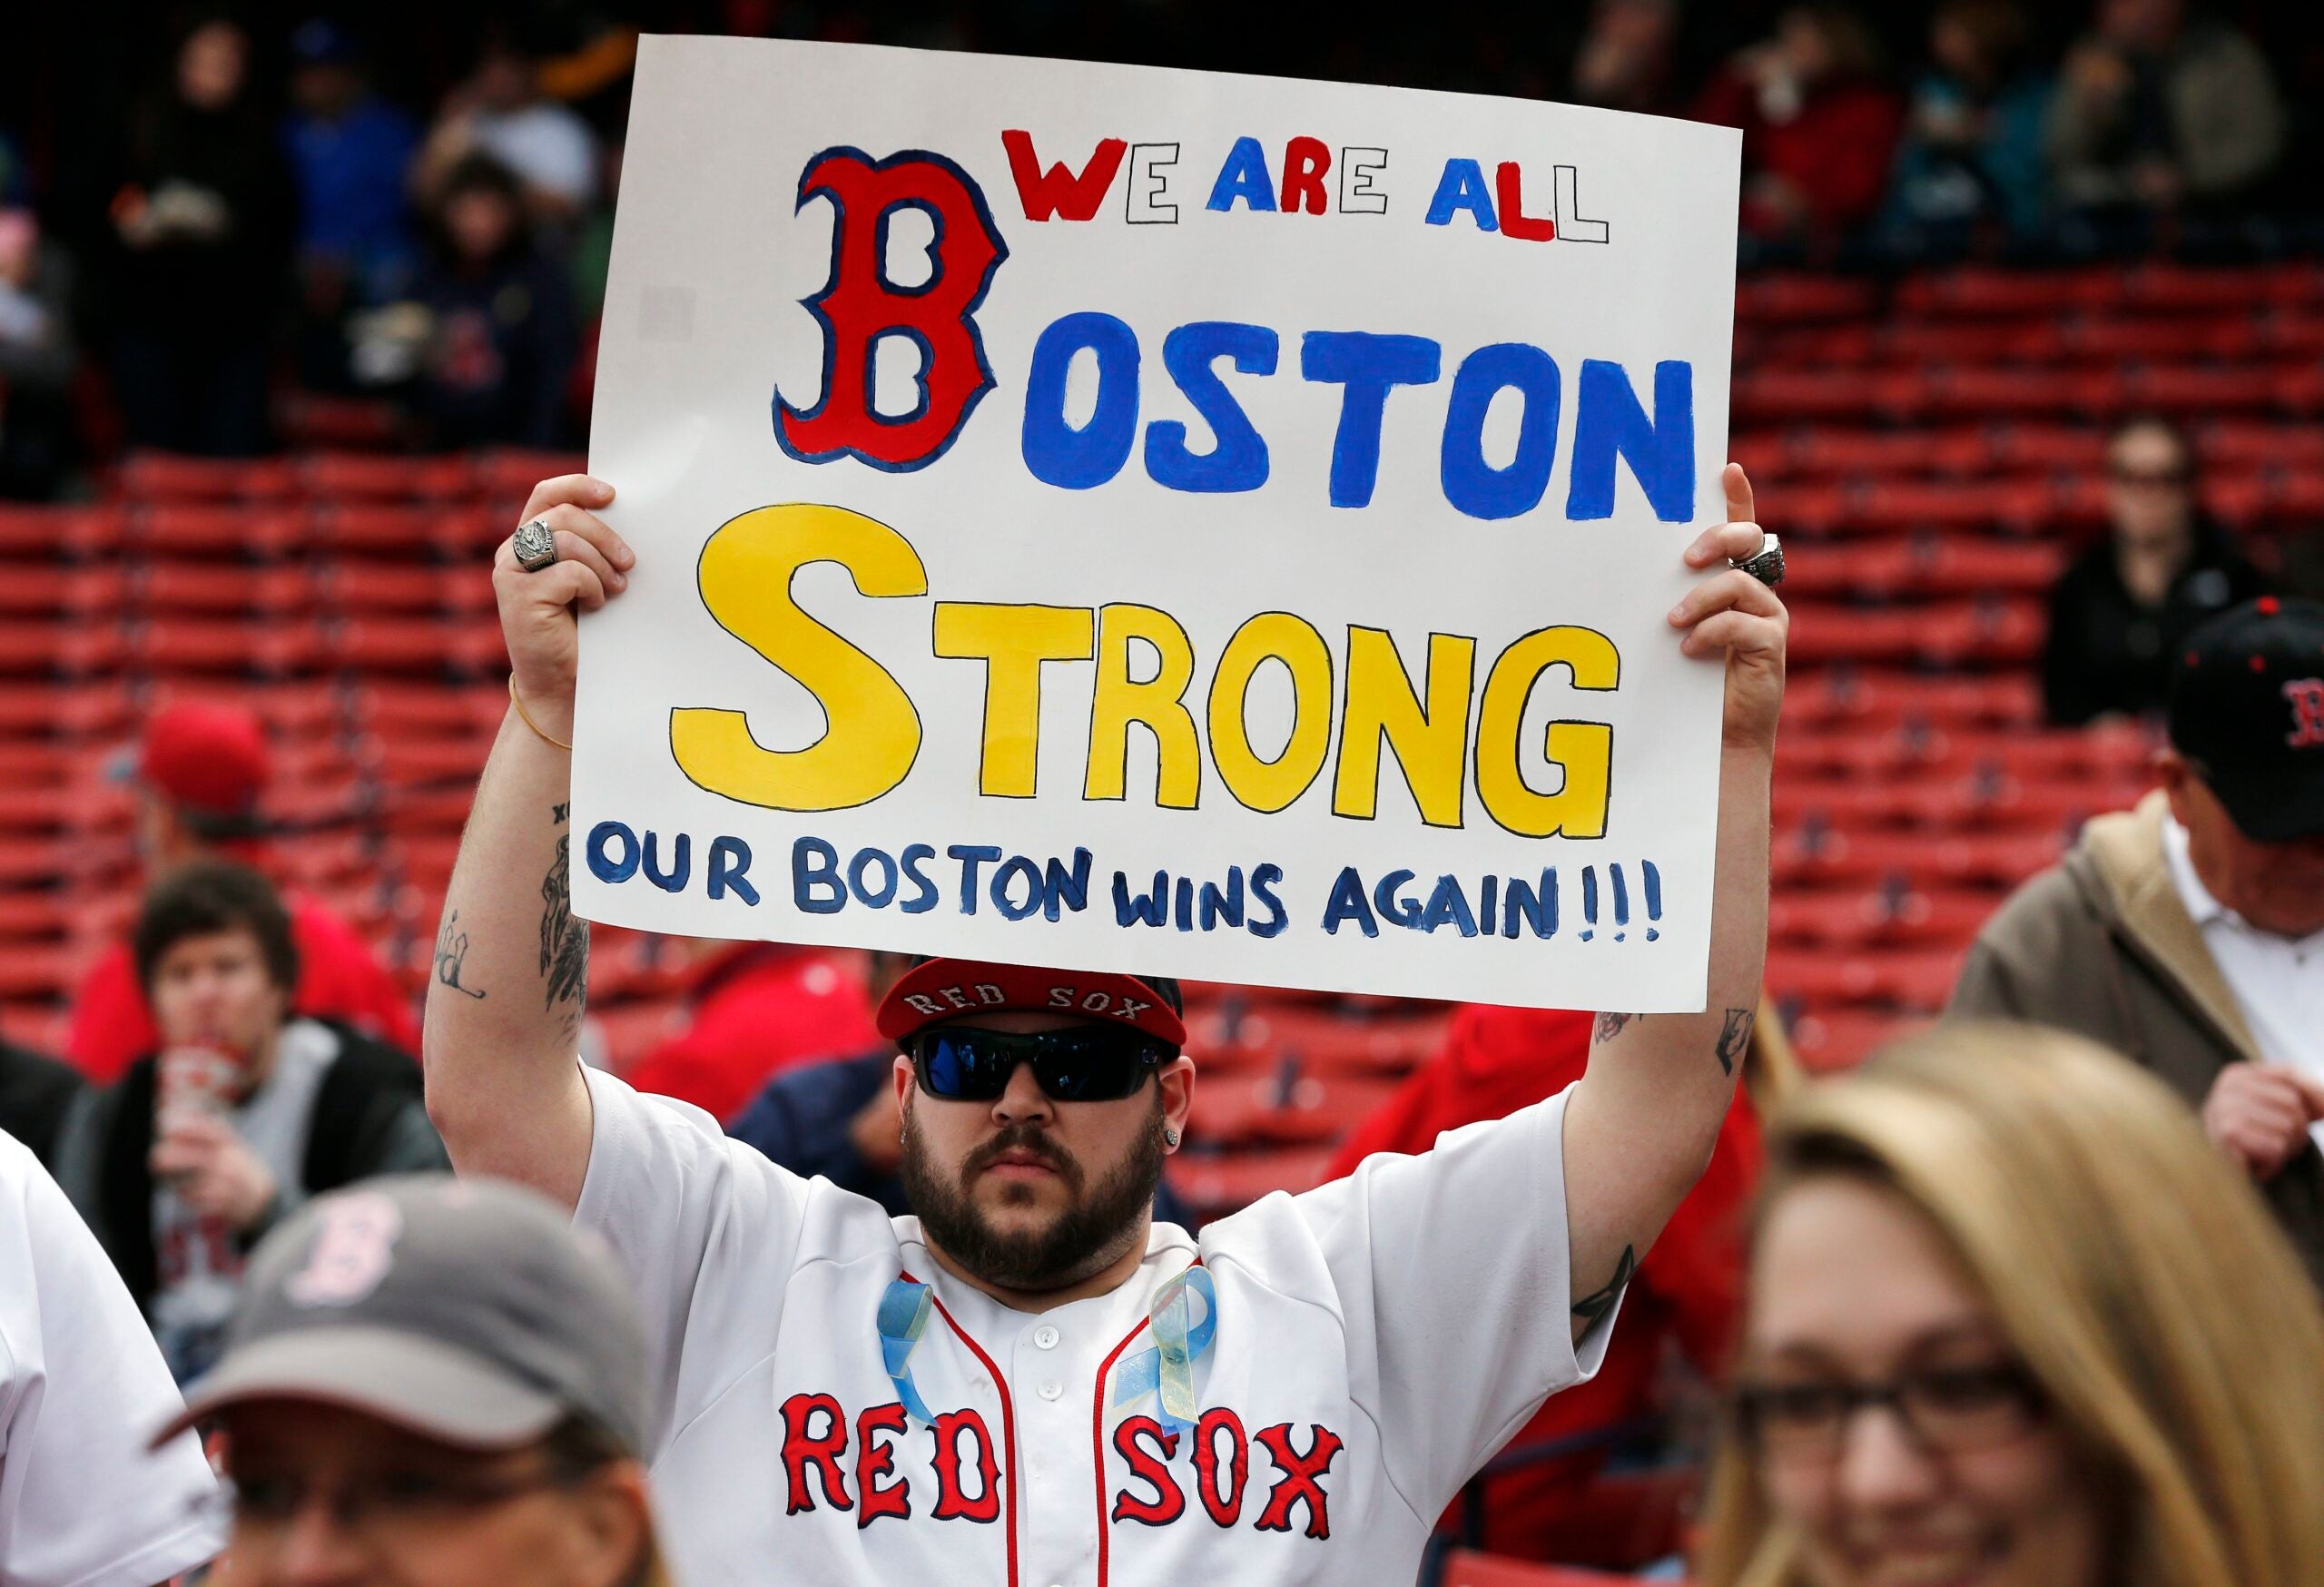 Is it too soon for some to be Boston Strong?